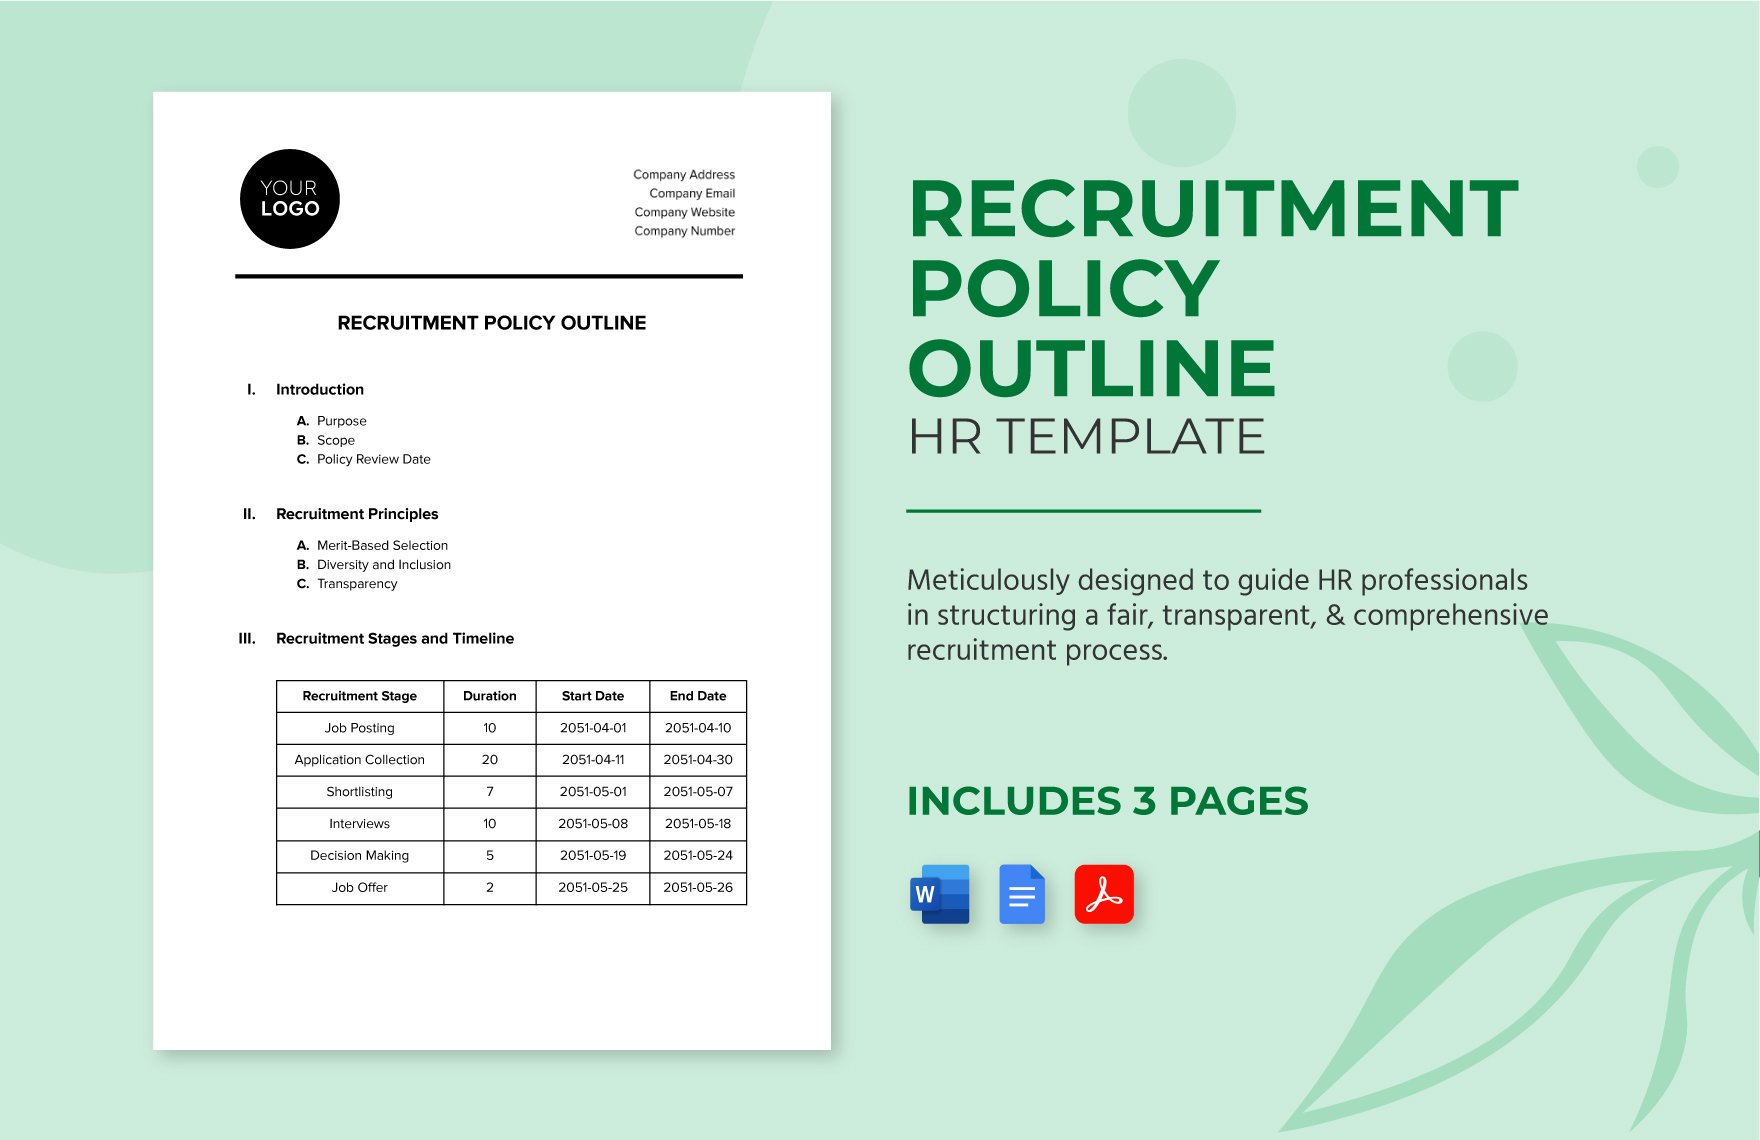 Recruitment Policy Outline HR Template